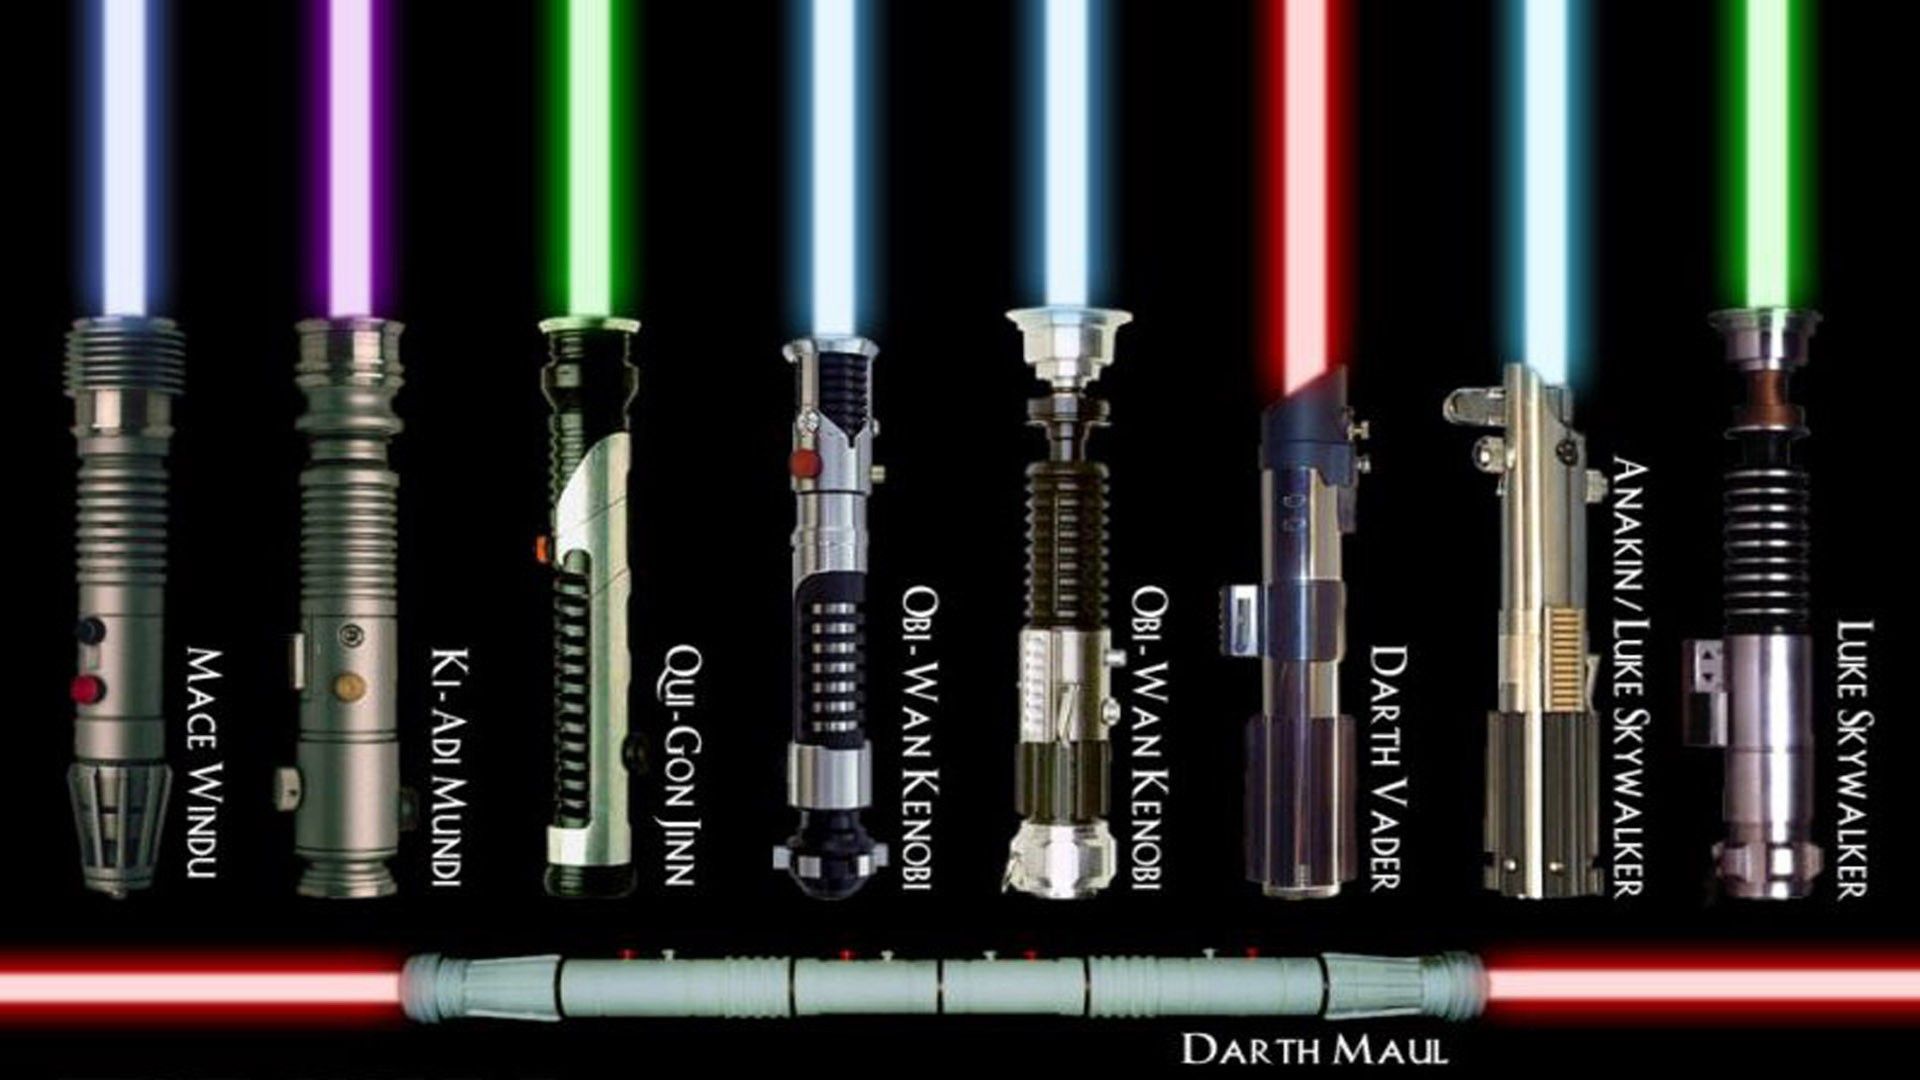 Saw this image and was excited then i saw it. ಠ_ಠ. Star wars light saber, Lightsaber colors, Lightsaber hilt